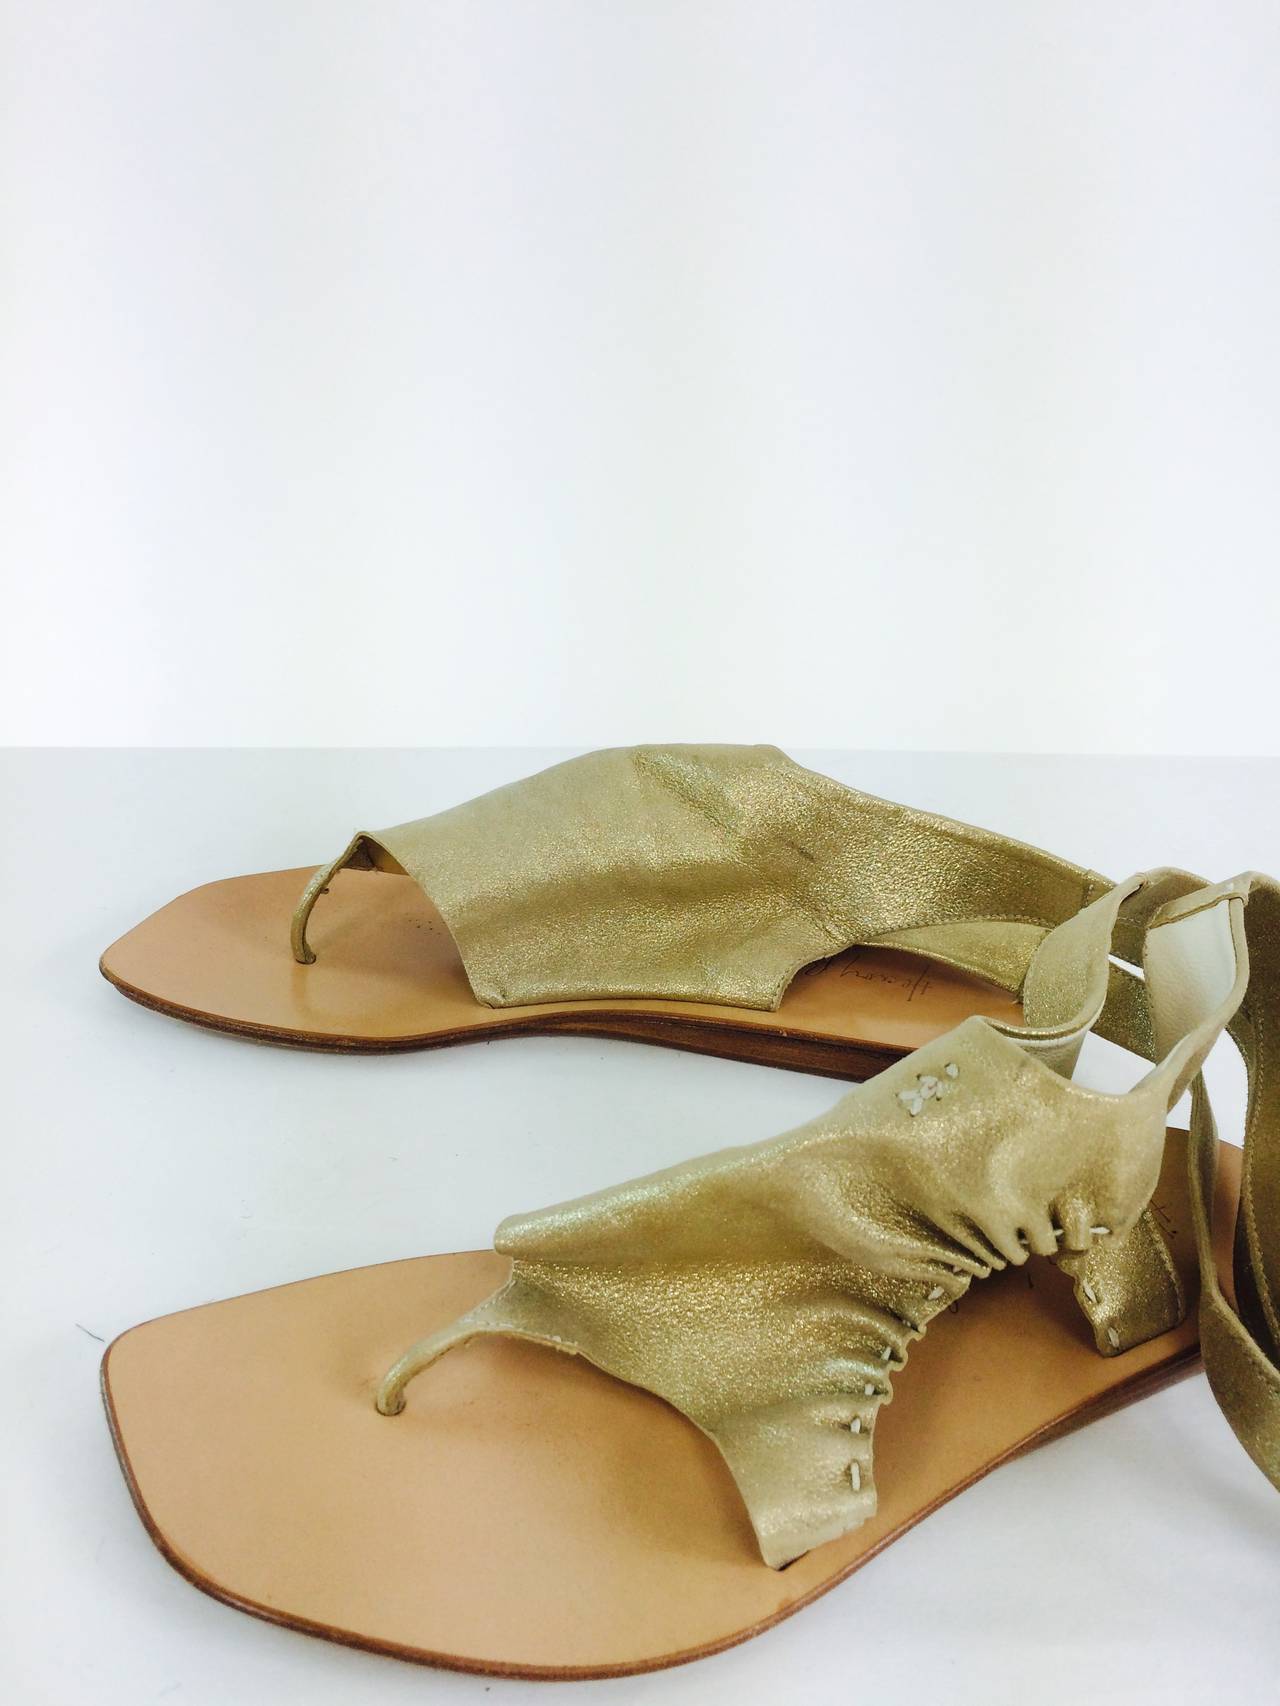 Henry Beguelin gold soft leather ankle wrap thong sandals 38 2